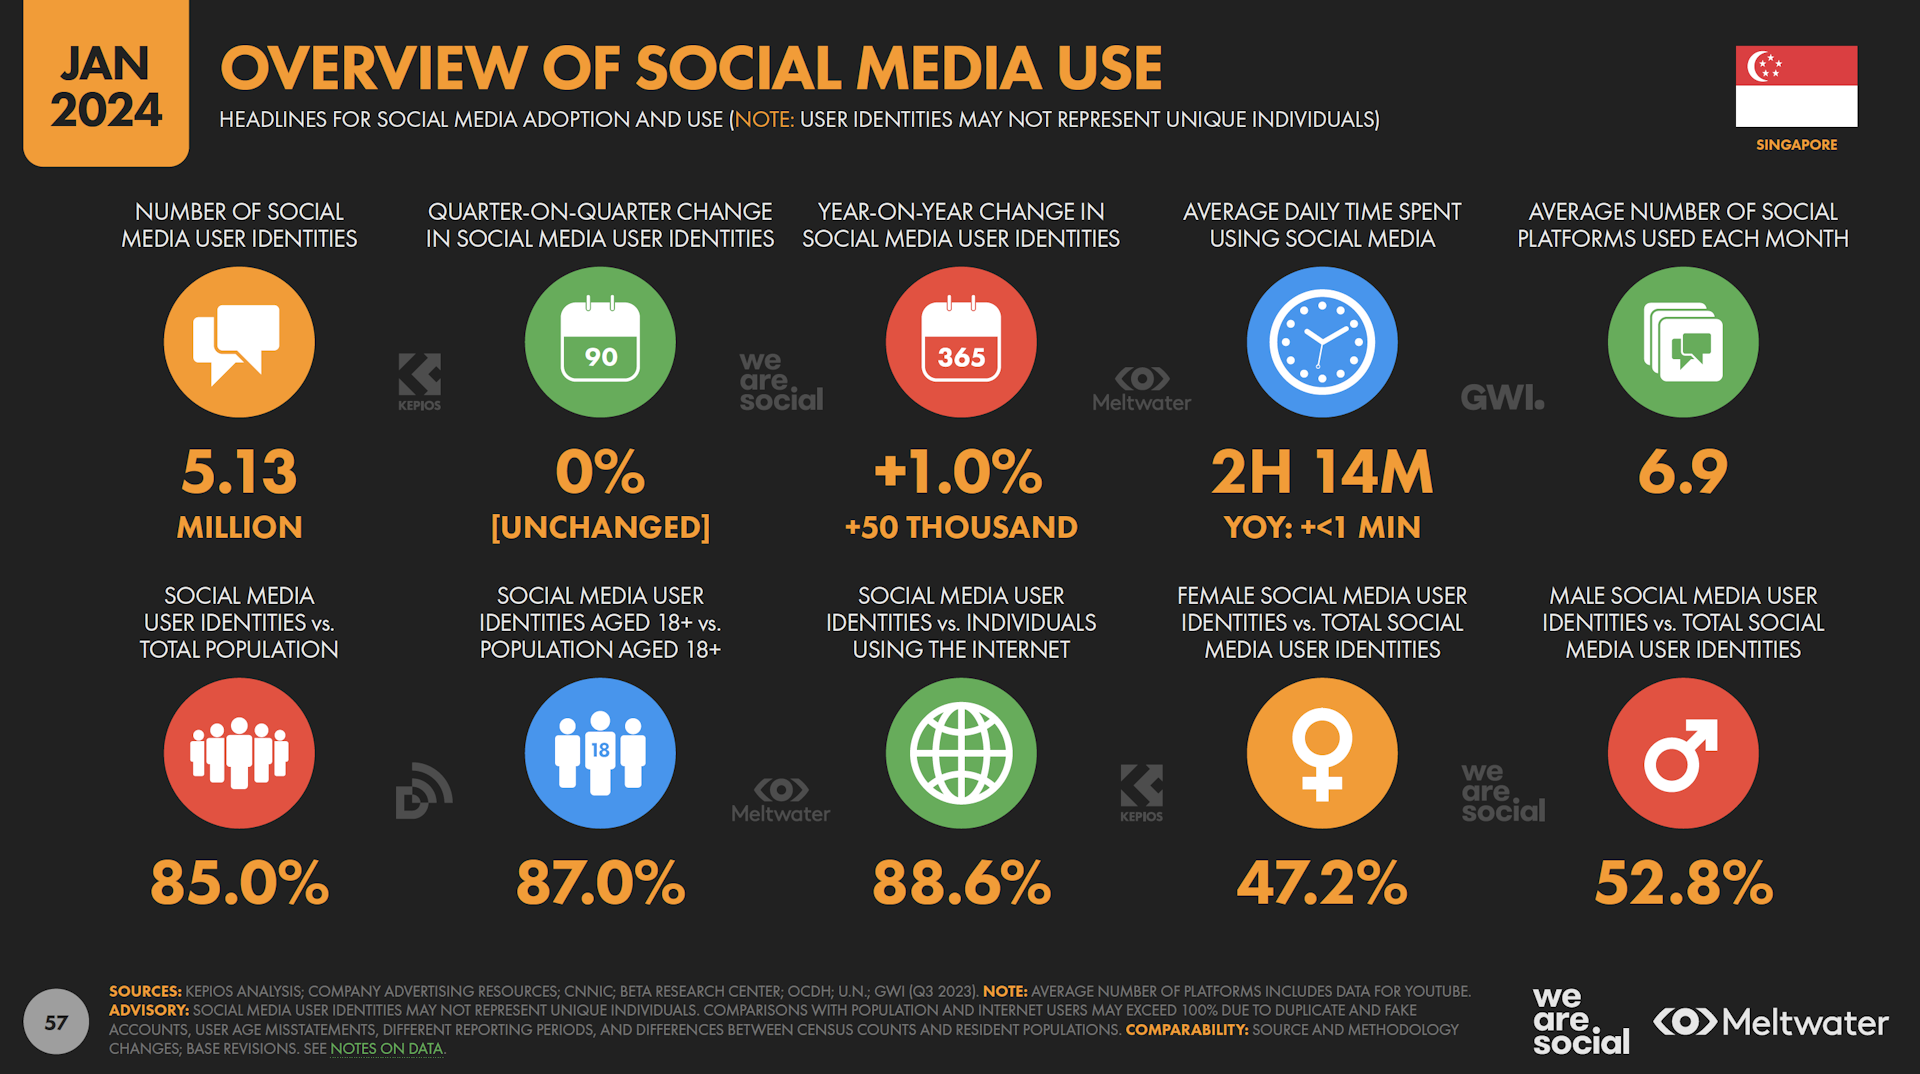 Overview of social media use based on Global Digital Report 2024 for Singapore